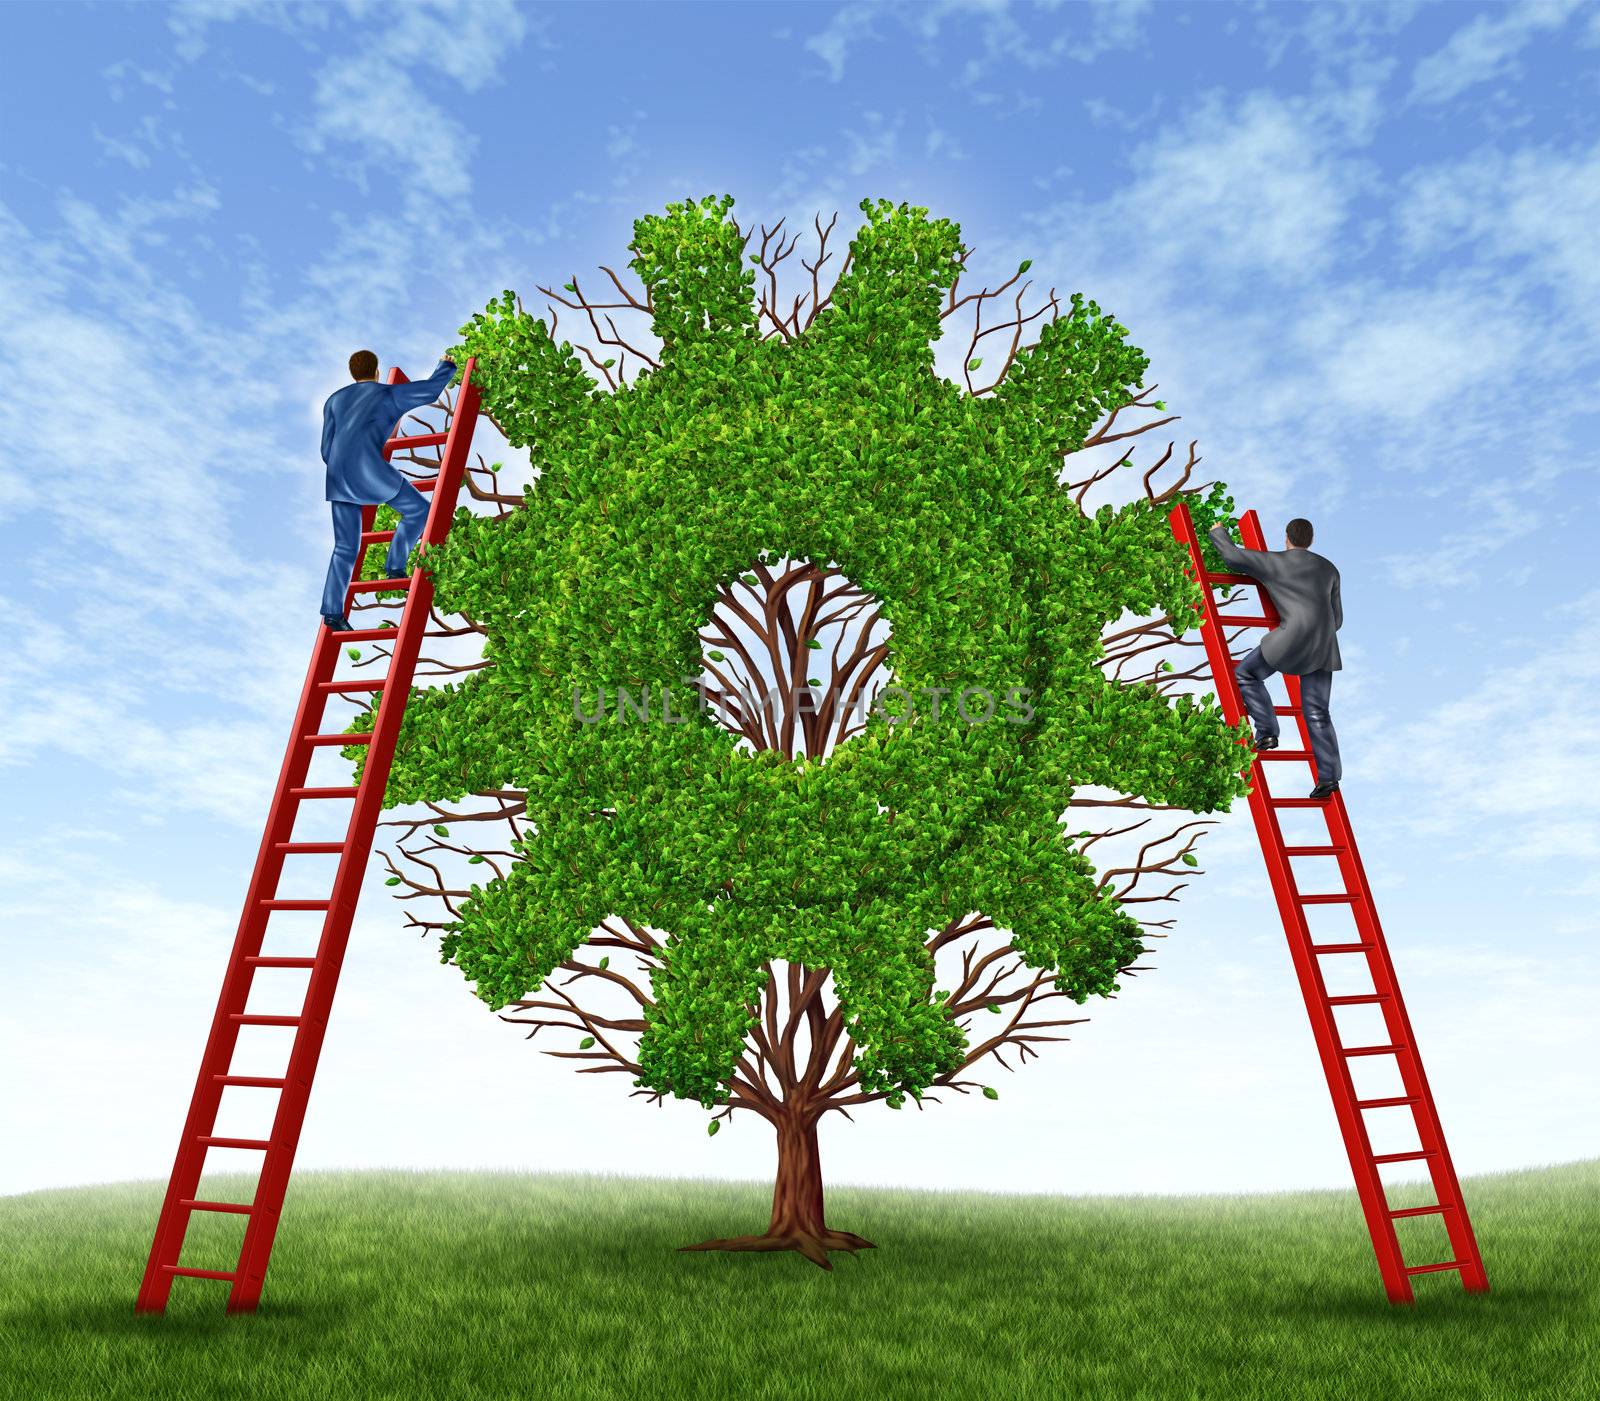 Building a business and growing financial success with a team represented by a tree in the shape of a gear or cog and business men climbing red ladders to care for the growth of the plant.